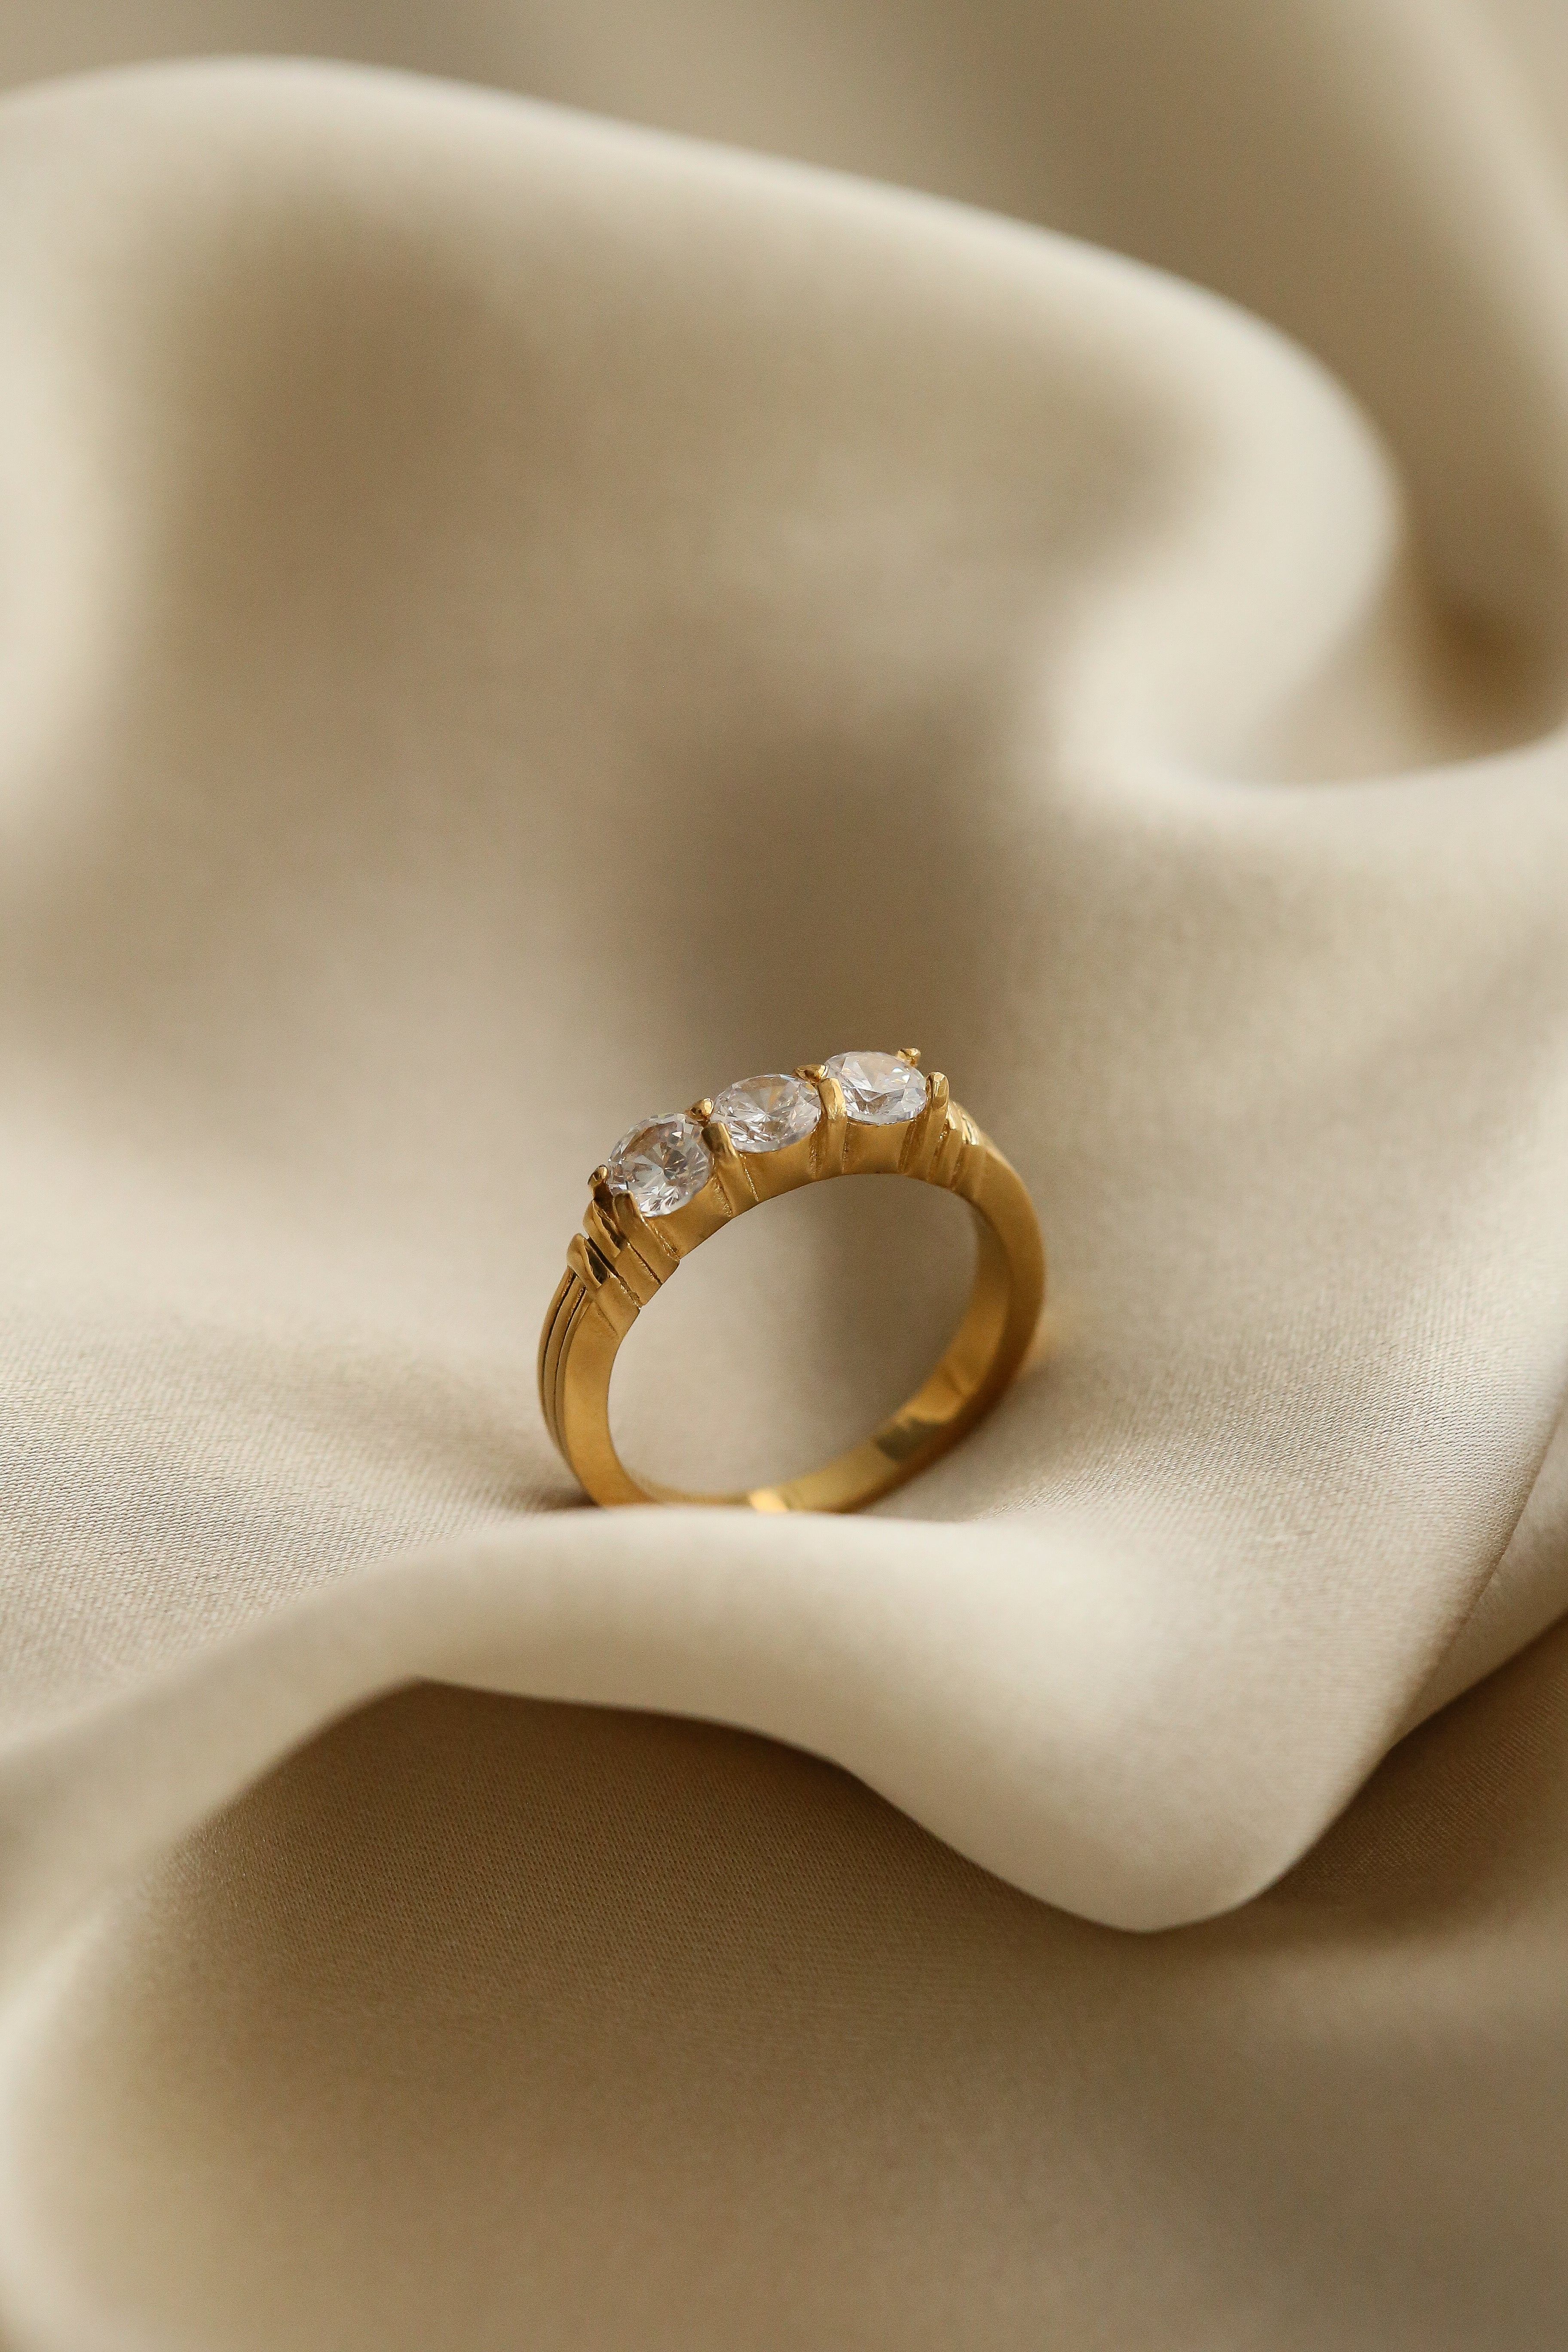 Jessica Ring - Boutique Minimaliste has waterproof, durable, elegant and vintage inspired jewelry